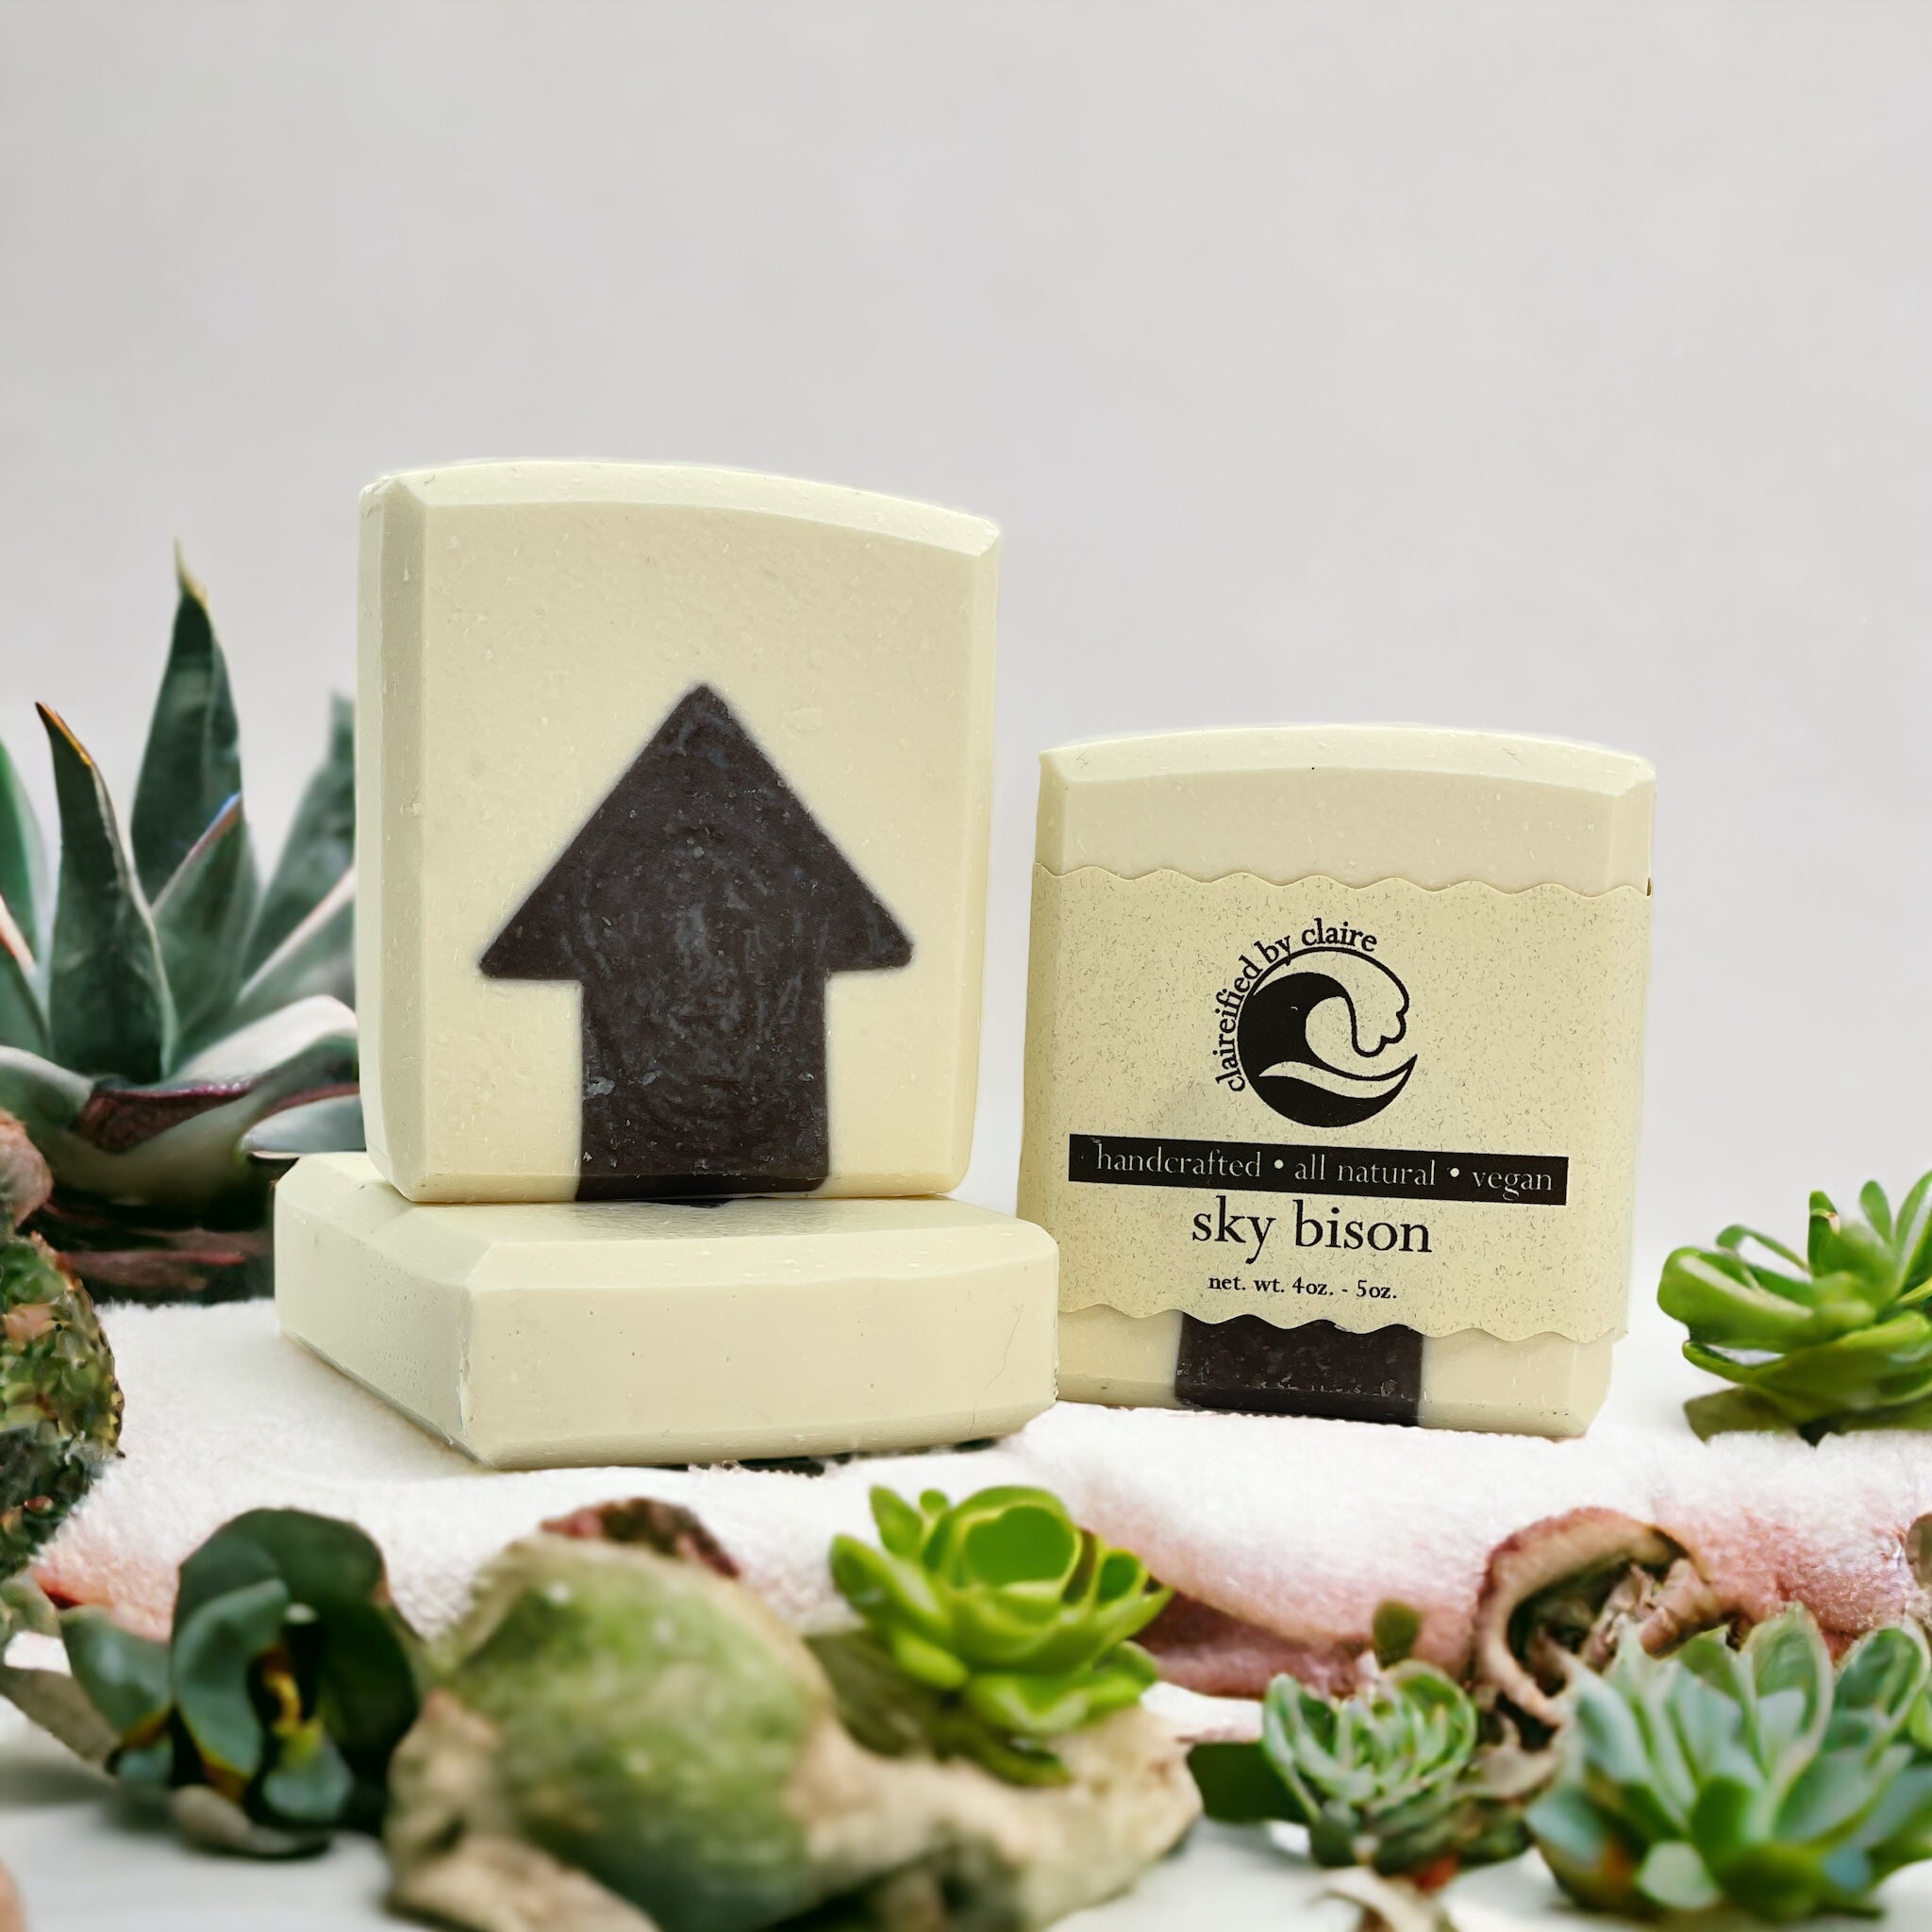 Sky Bison handmade soap inspired by Appa from Avatar, The Last Air Bender